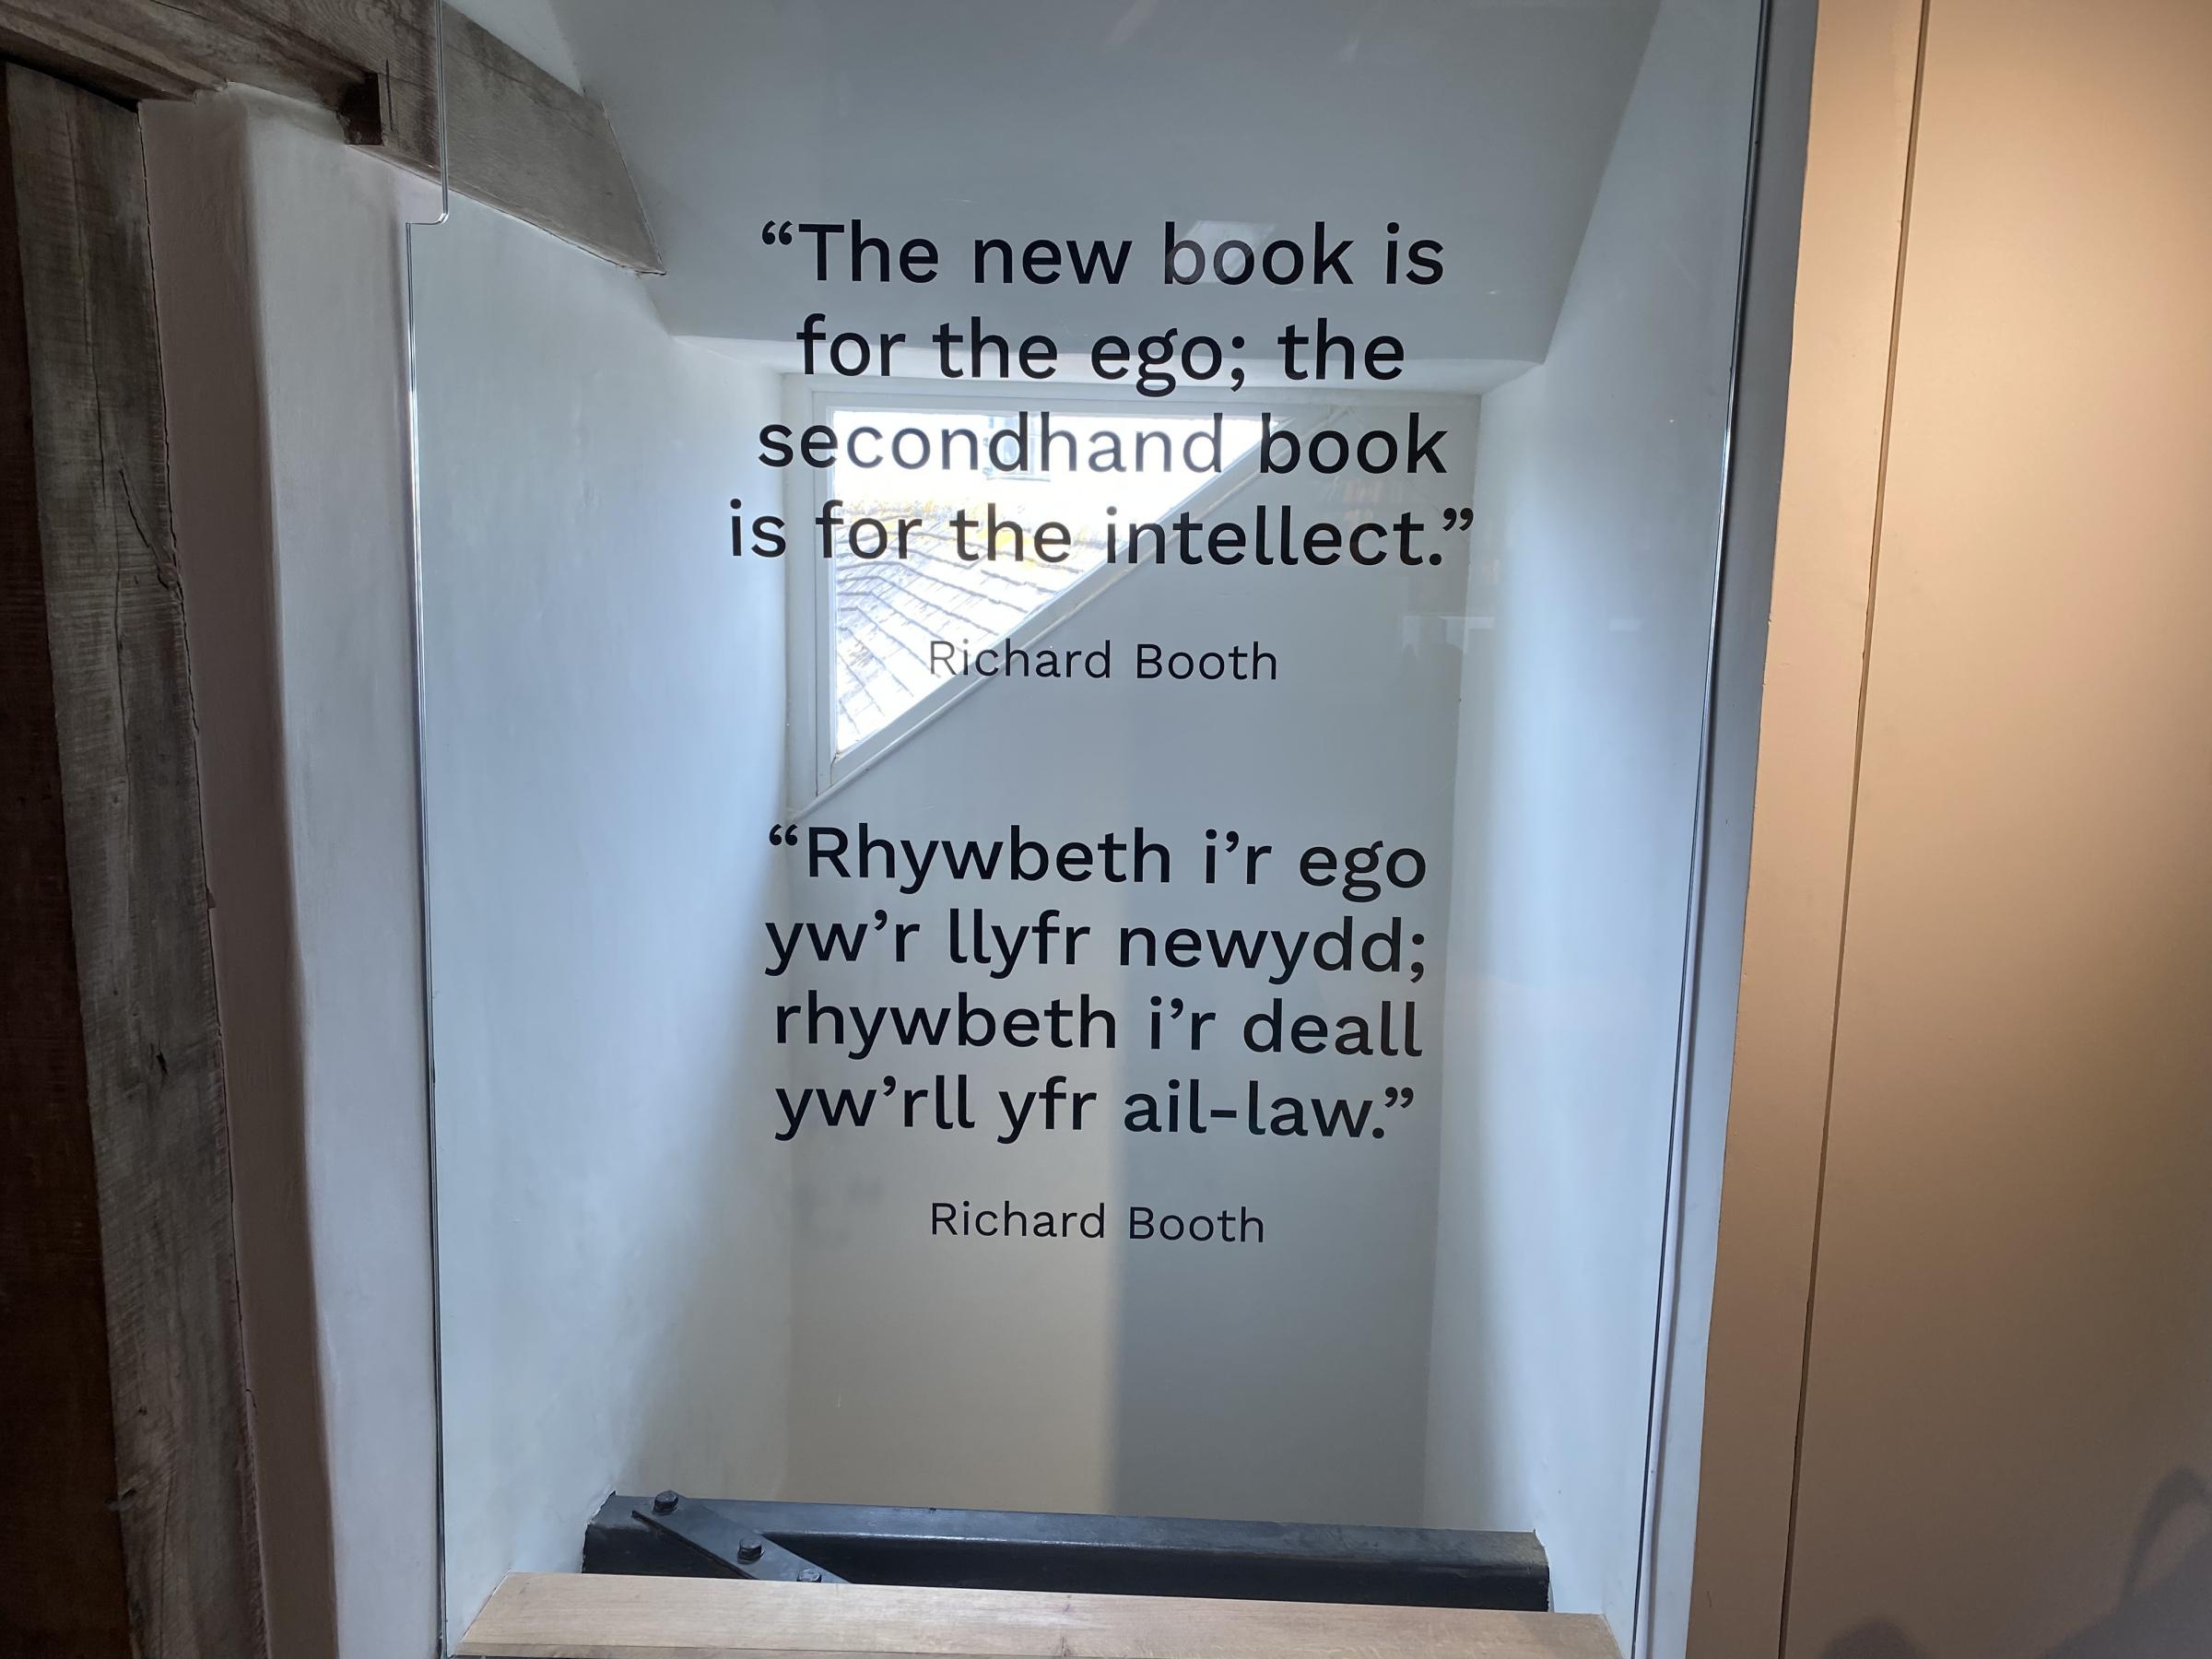 A quote from the castles ex-owner Richard Booth